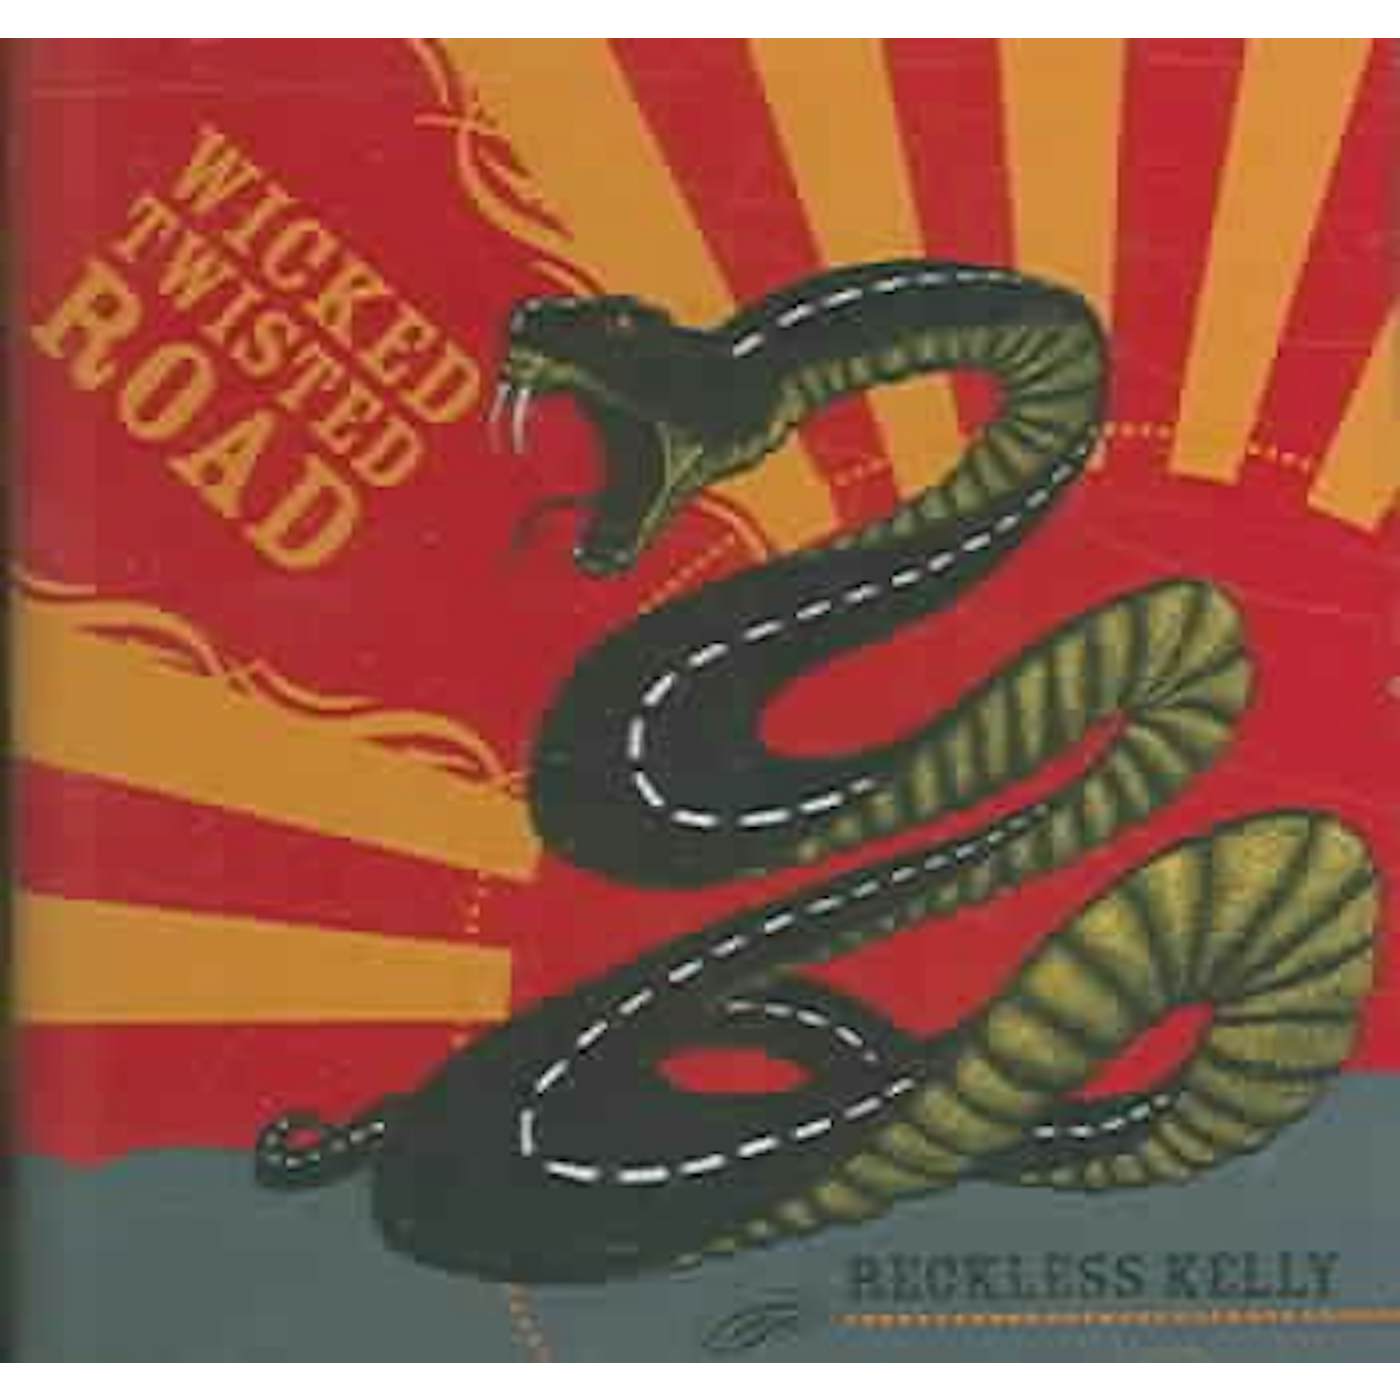 Reckless Kelly Wicked Twisted Road CD